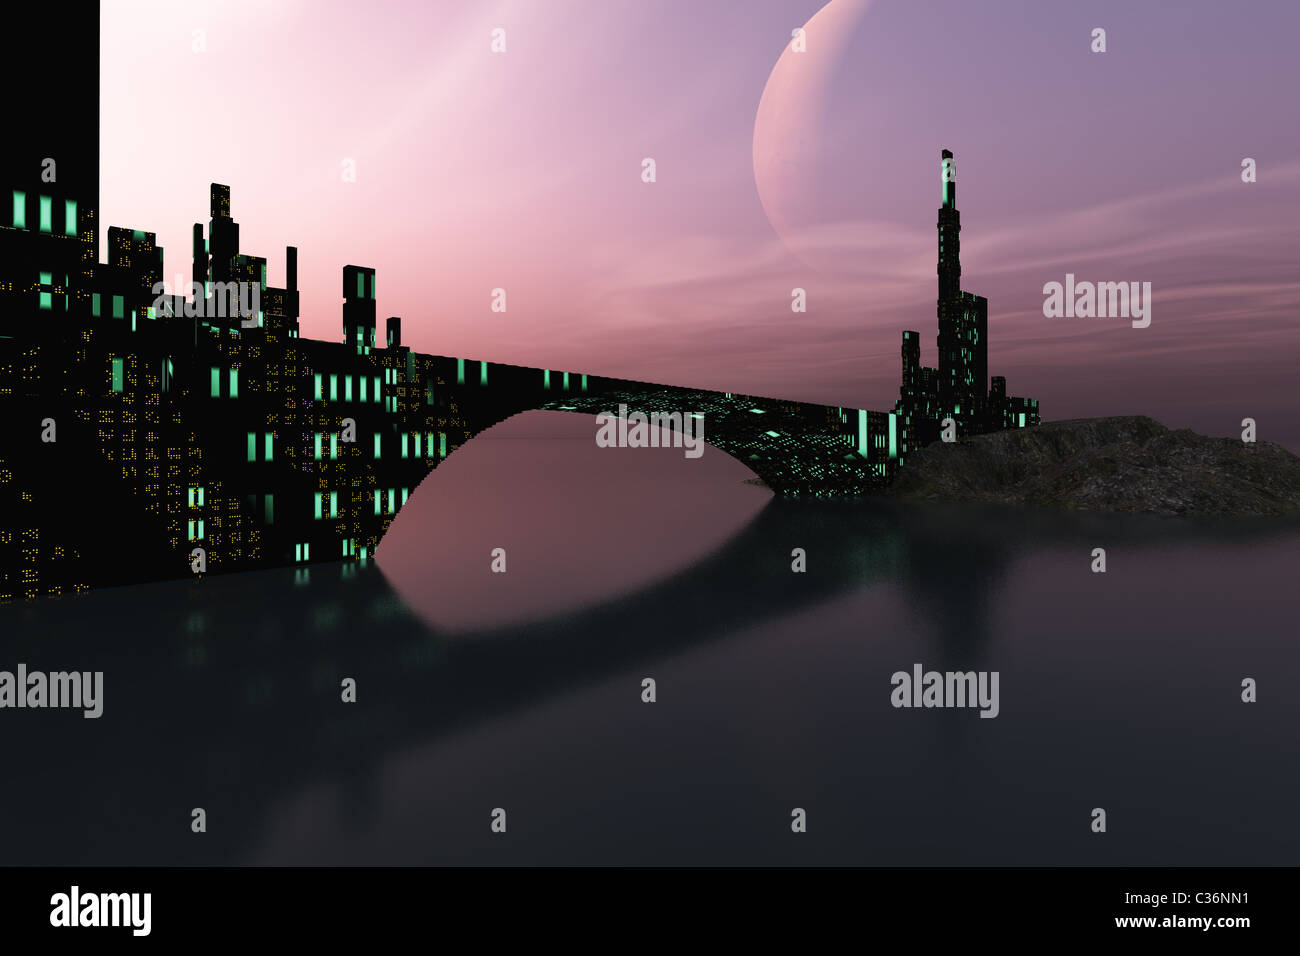 A beautiful city is reflected in calm waters on another world out in the galaxy. Stock Photo